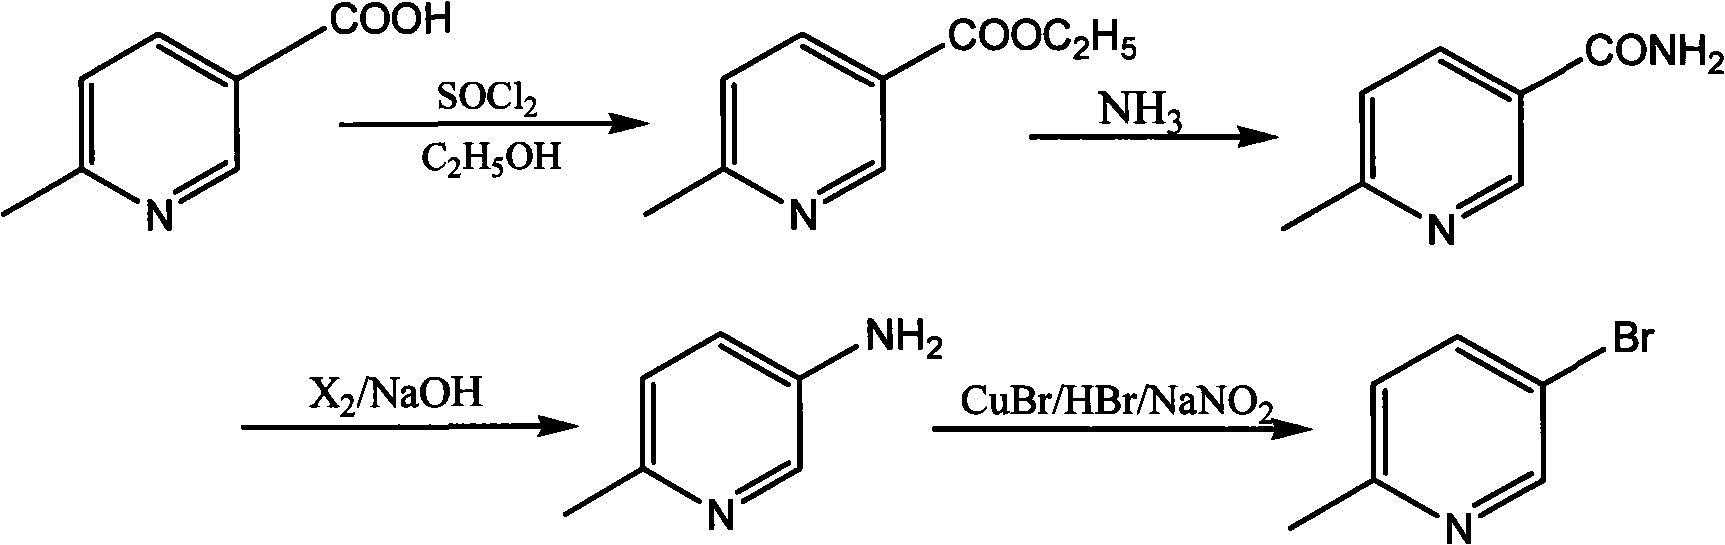 Synthetic method for 5-bromine-2-methylpyridine